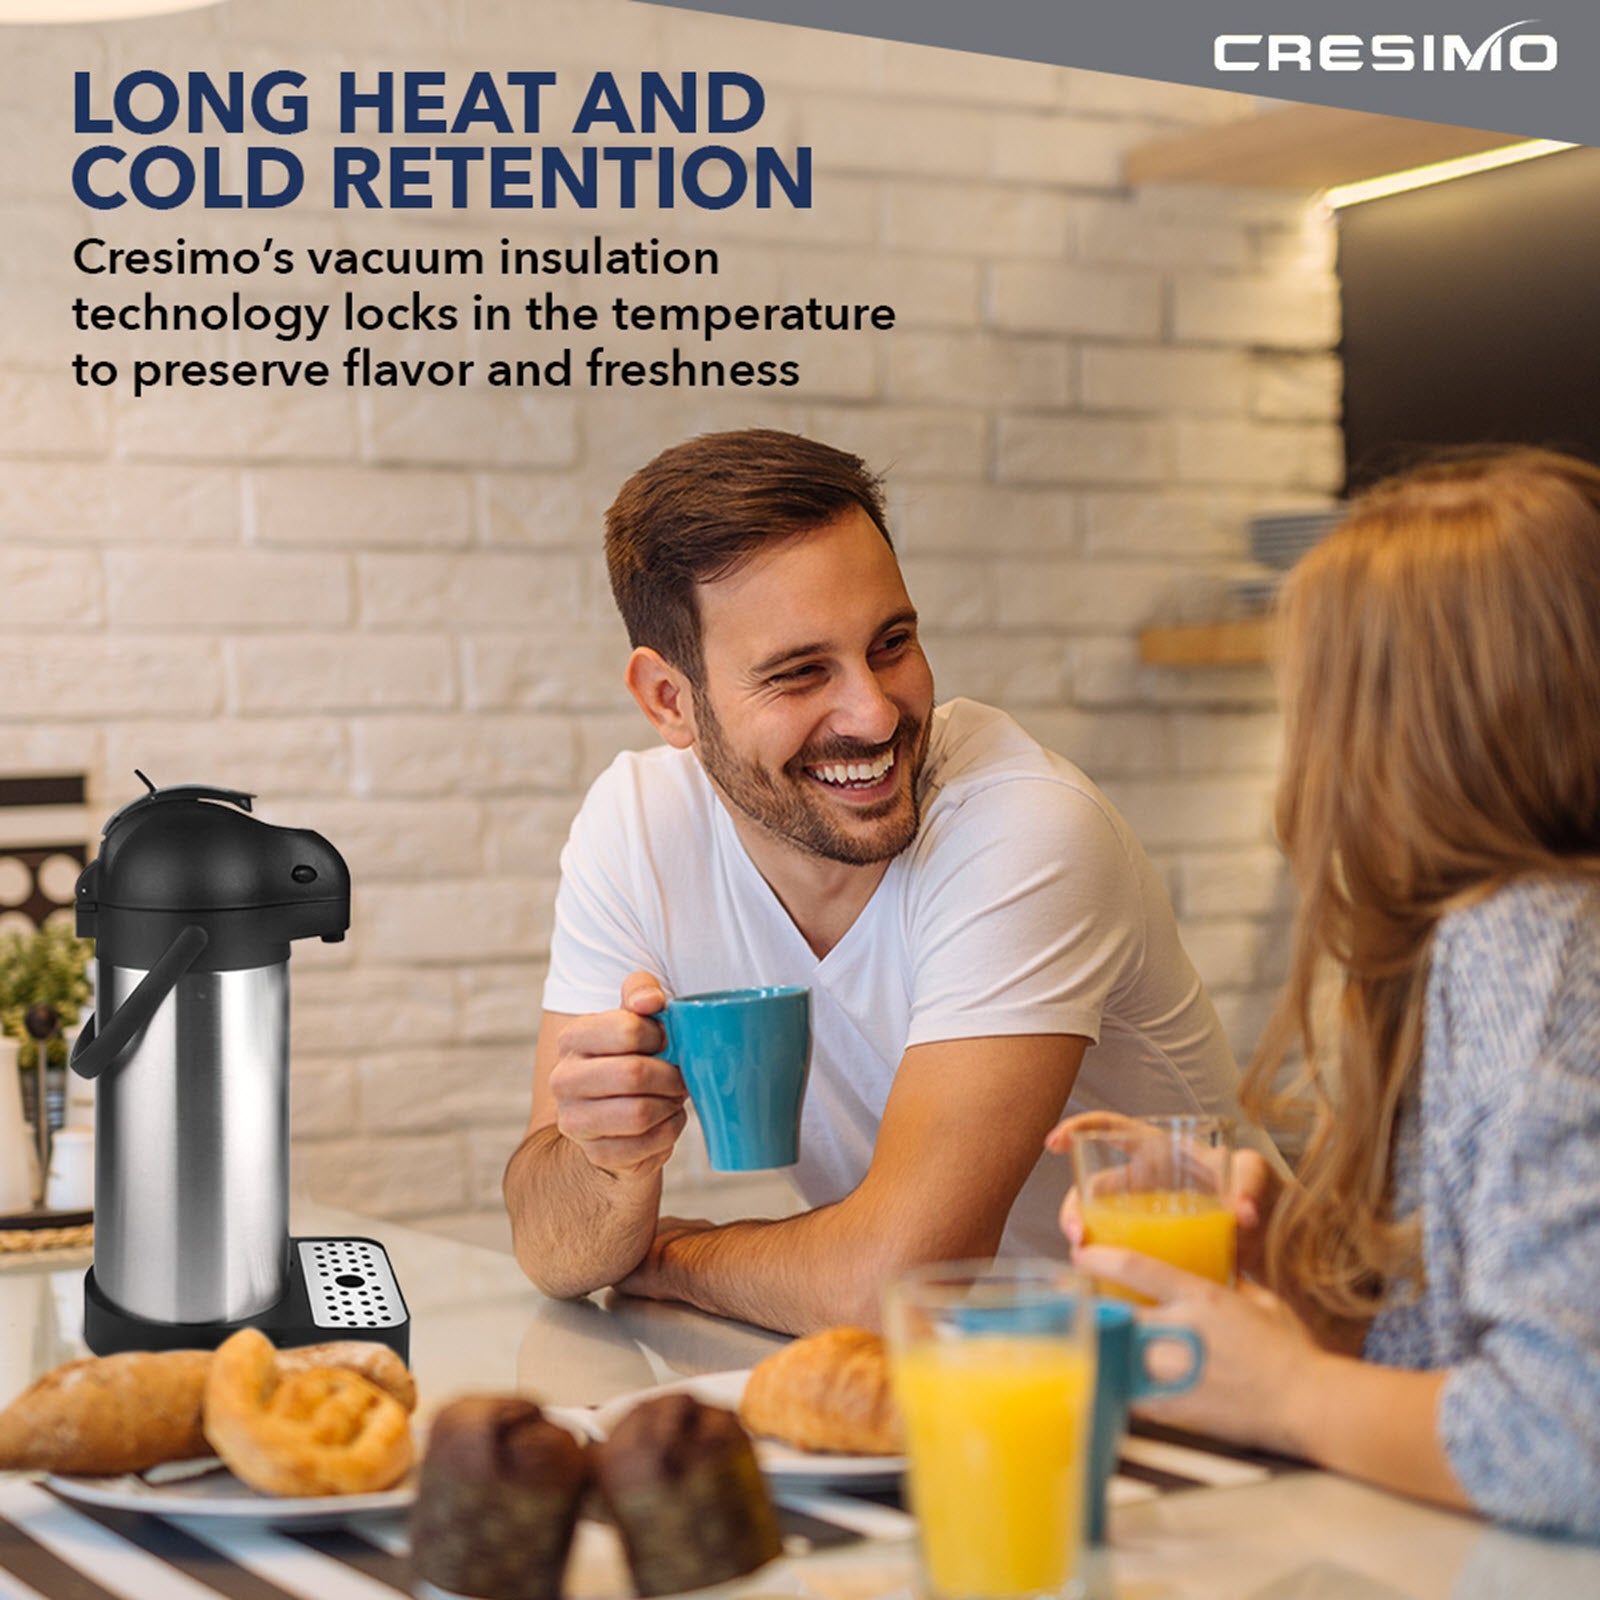 Cresimo 2.2 Liter Airpot Thermal Coffee Carafe with Pump/Lever